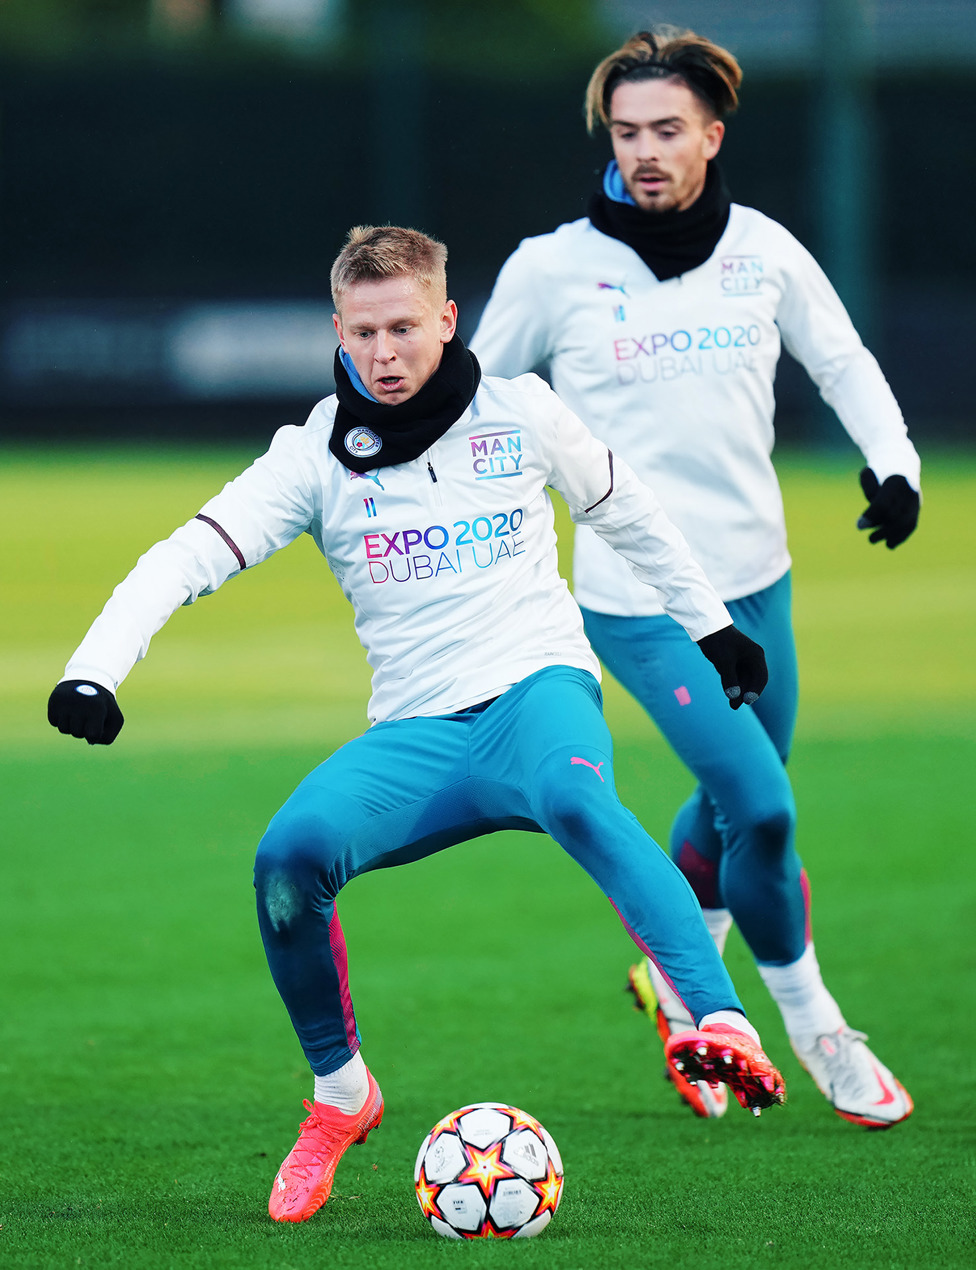 ACTION MEN: Oleks Zinchenko and Jack Grealish are in the thick of things